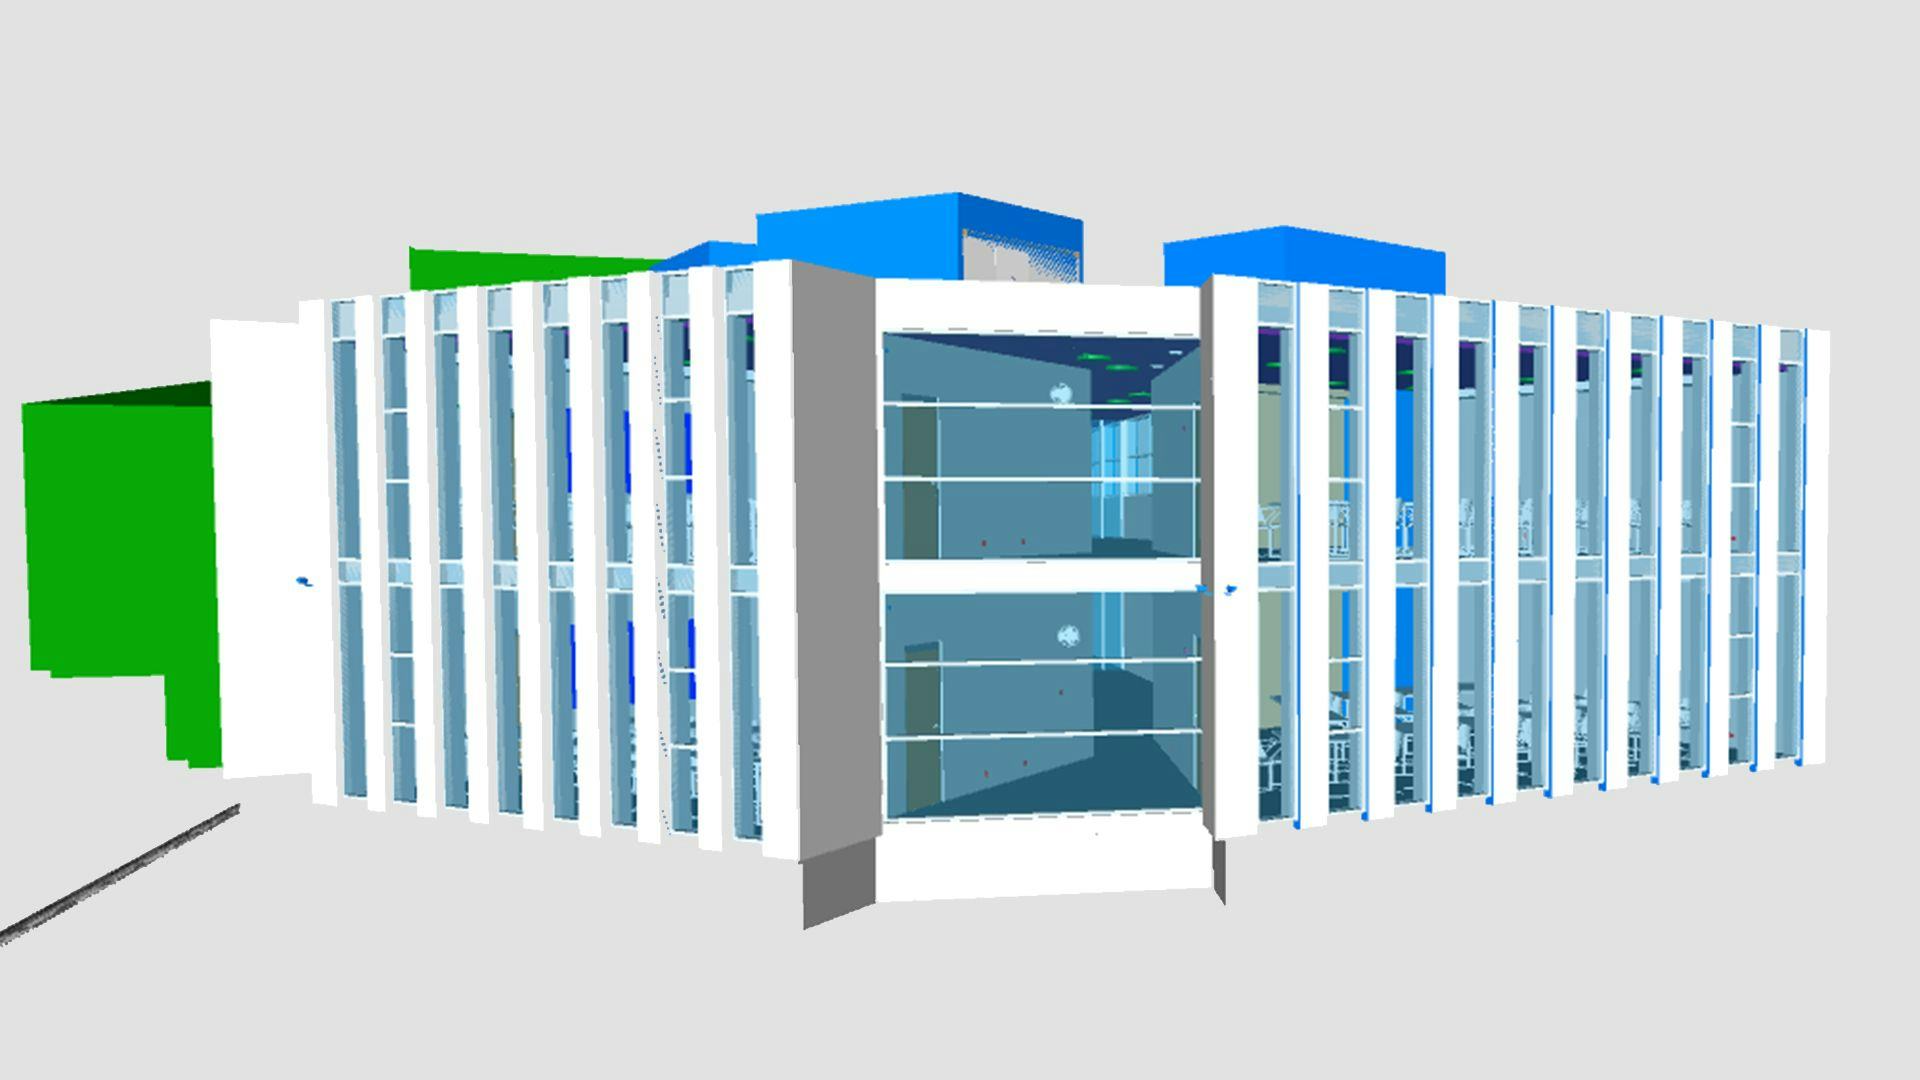 3D model of a white building with large glass window in the front